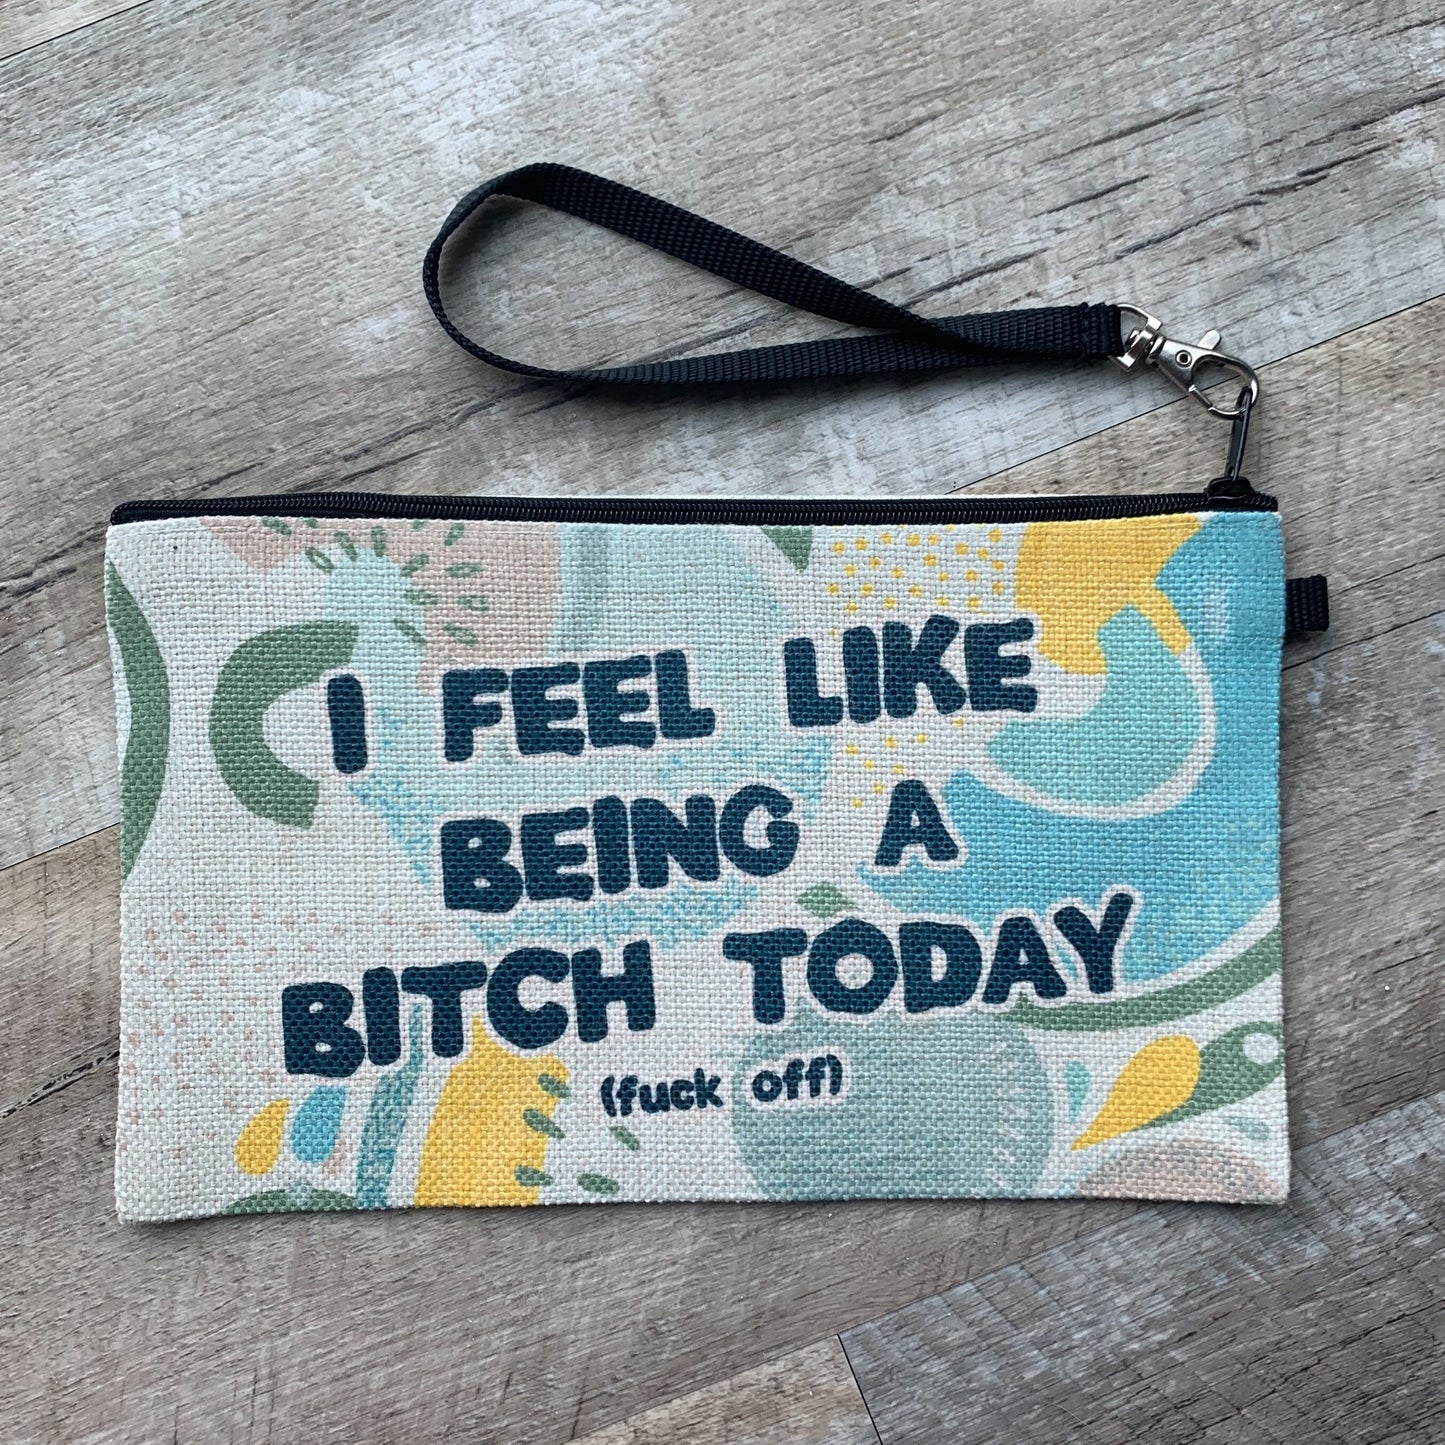 I Feel Like Being a Bitch Today (Fuck Off) Cosmetic Bag